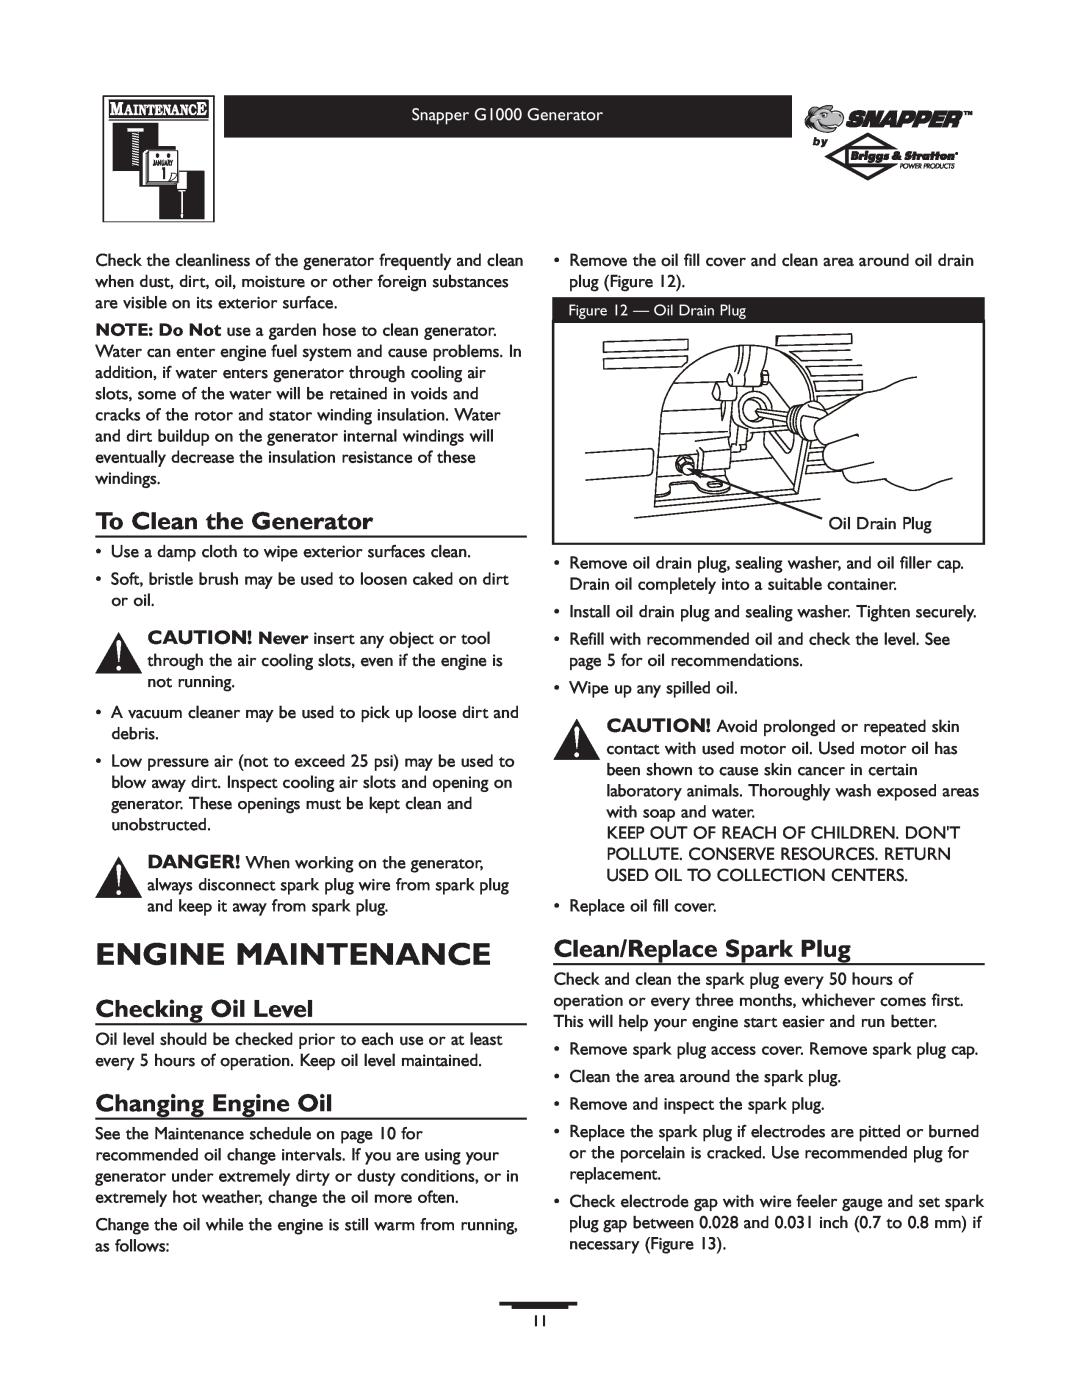 Snapper 1666-0 owner manual Engine Maintenance, To Clean the Generator, Checking Oil Level, Changing Engine Oil 